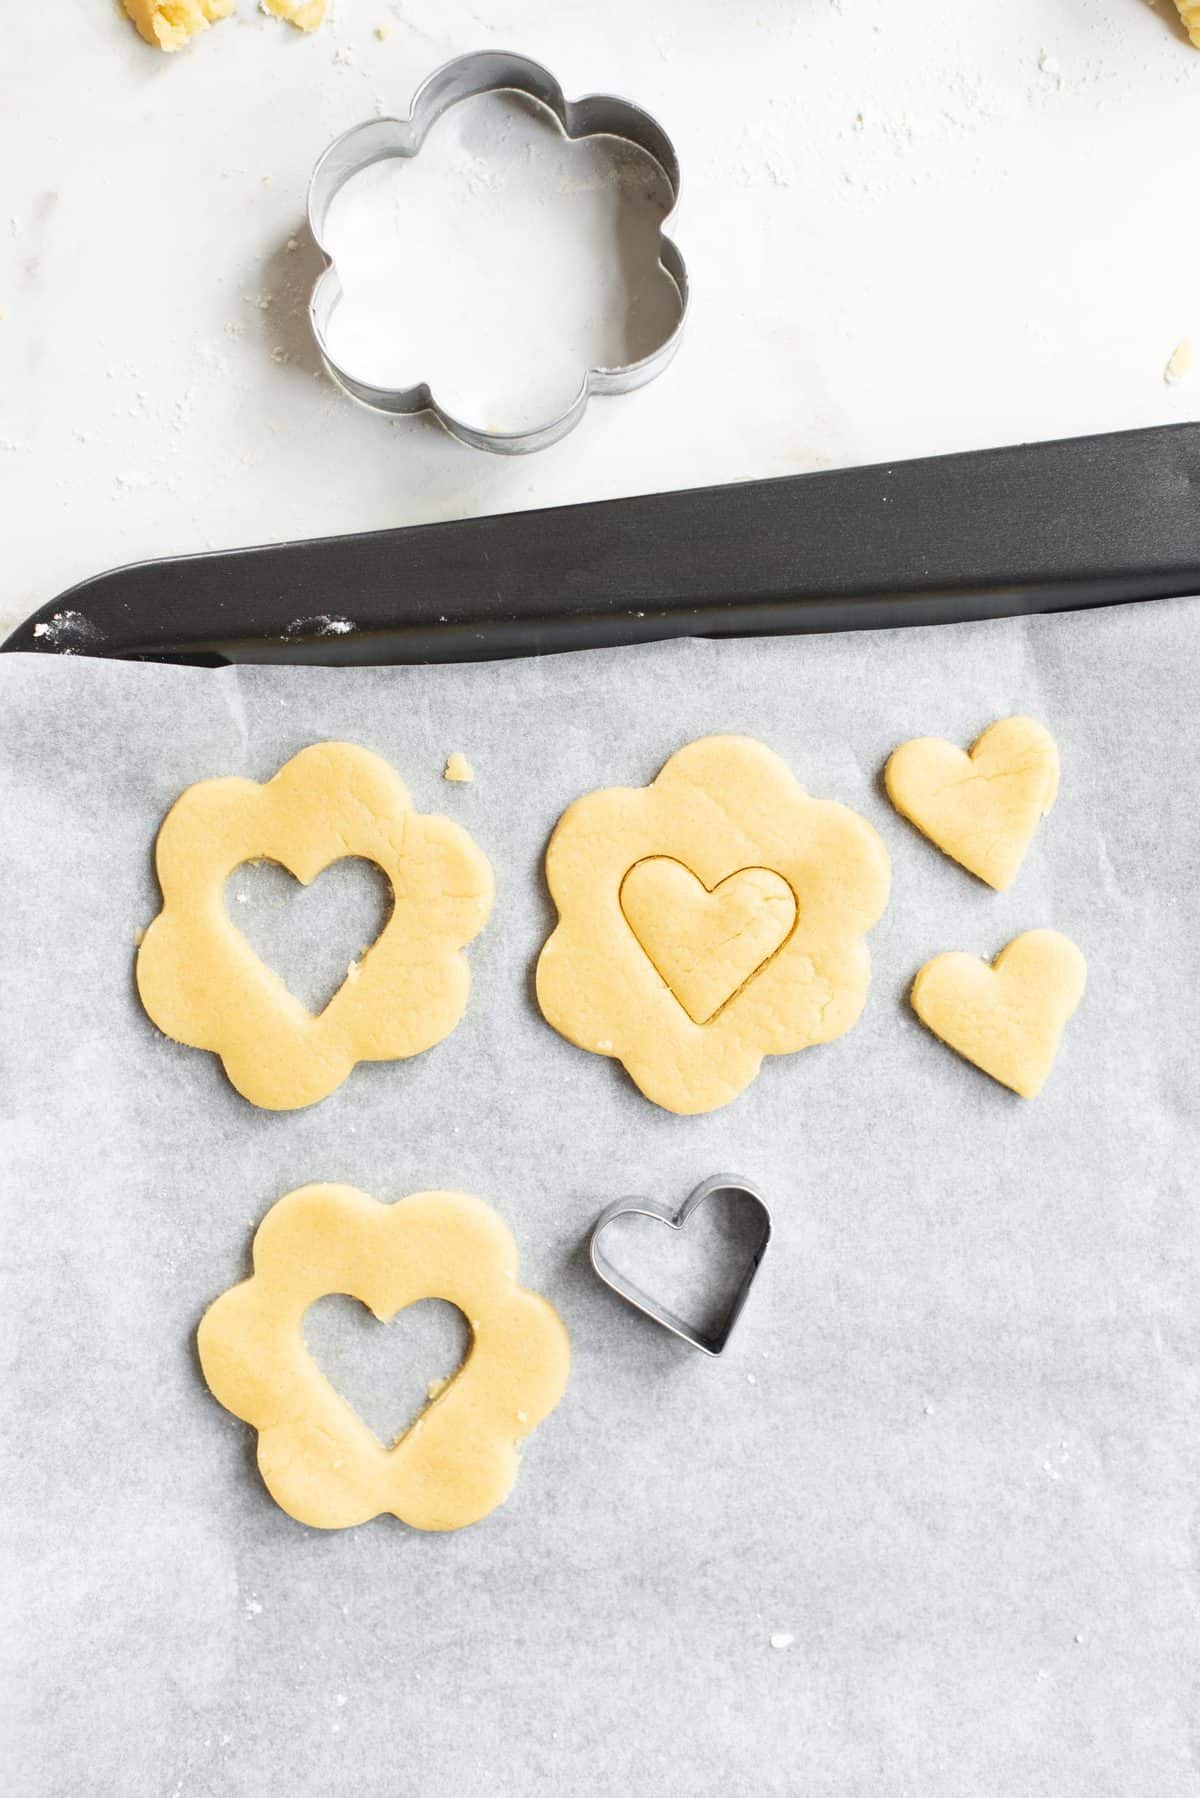 small heart cookie cutter cutting out the center of the flowers